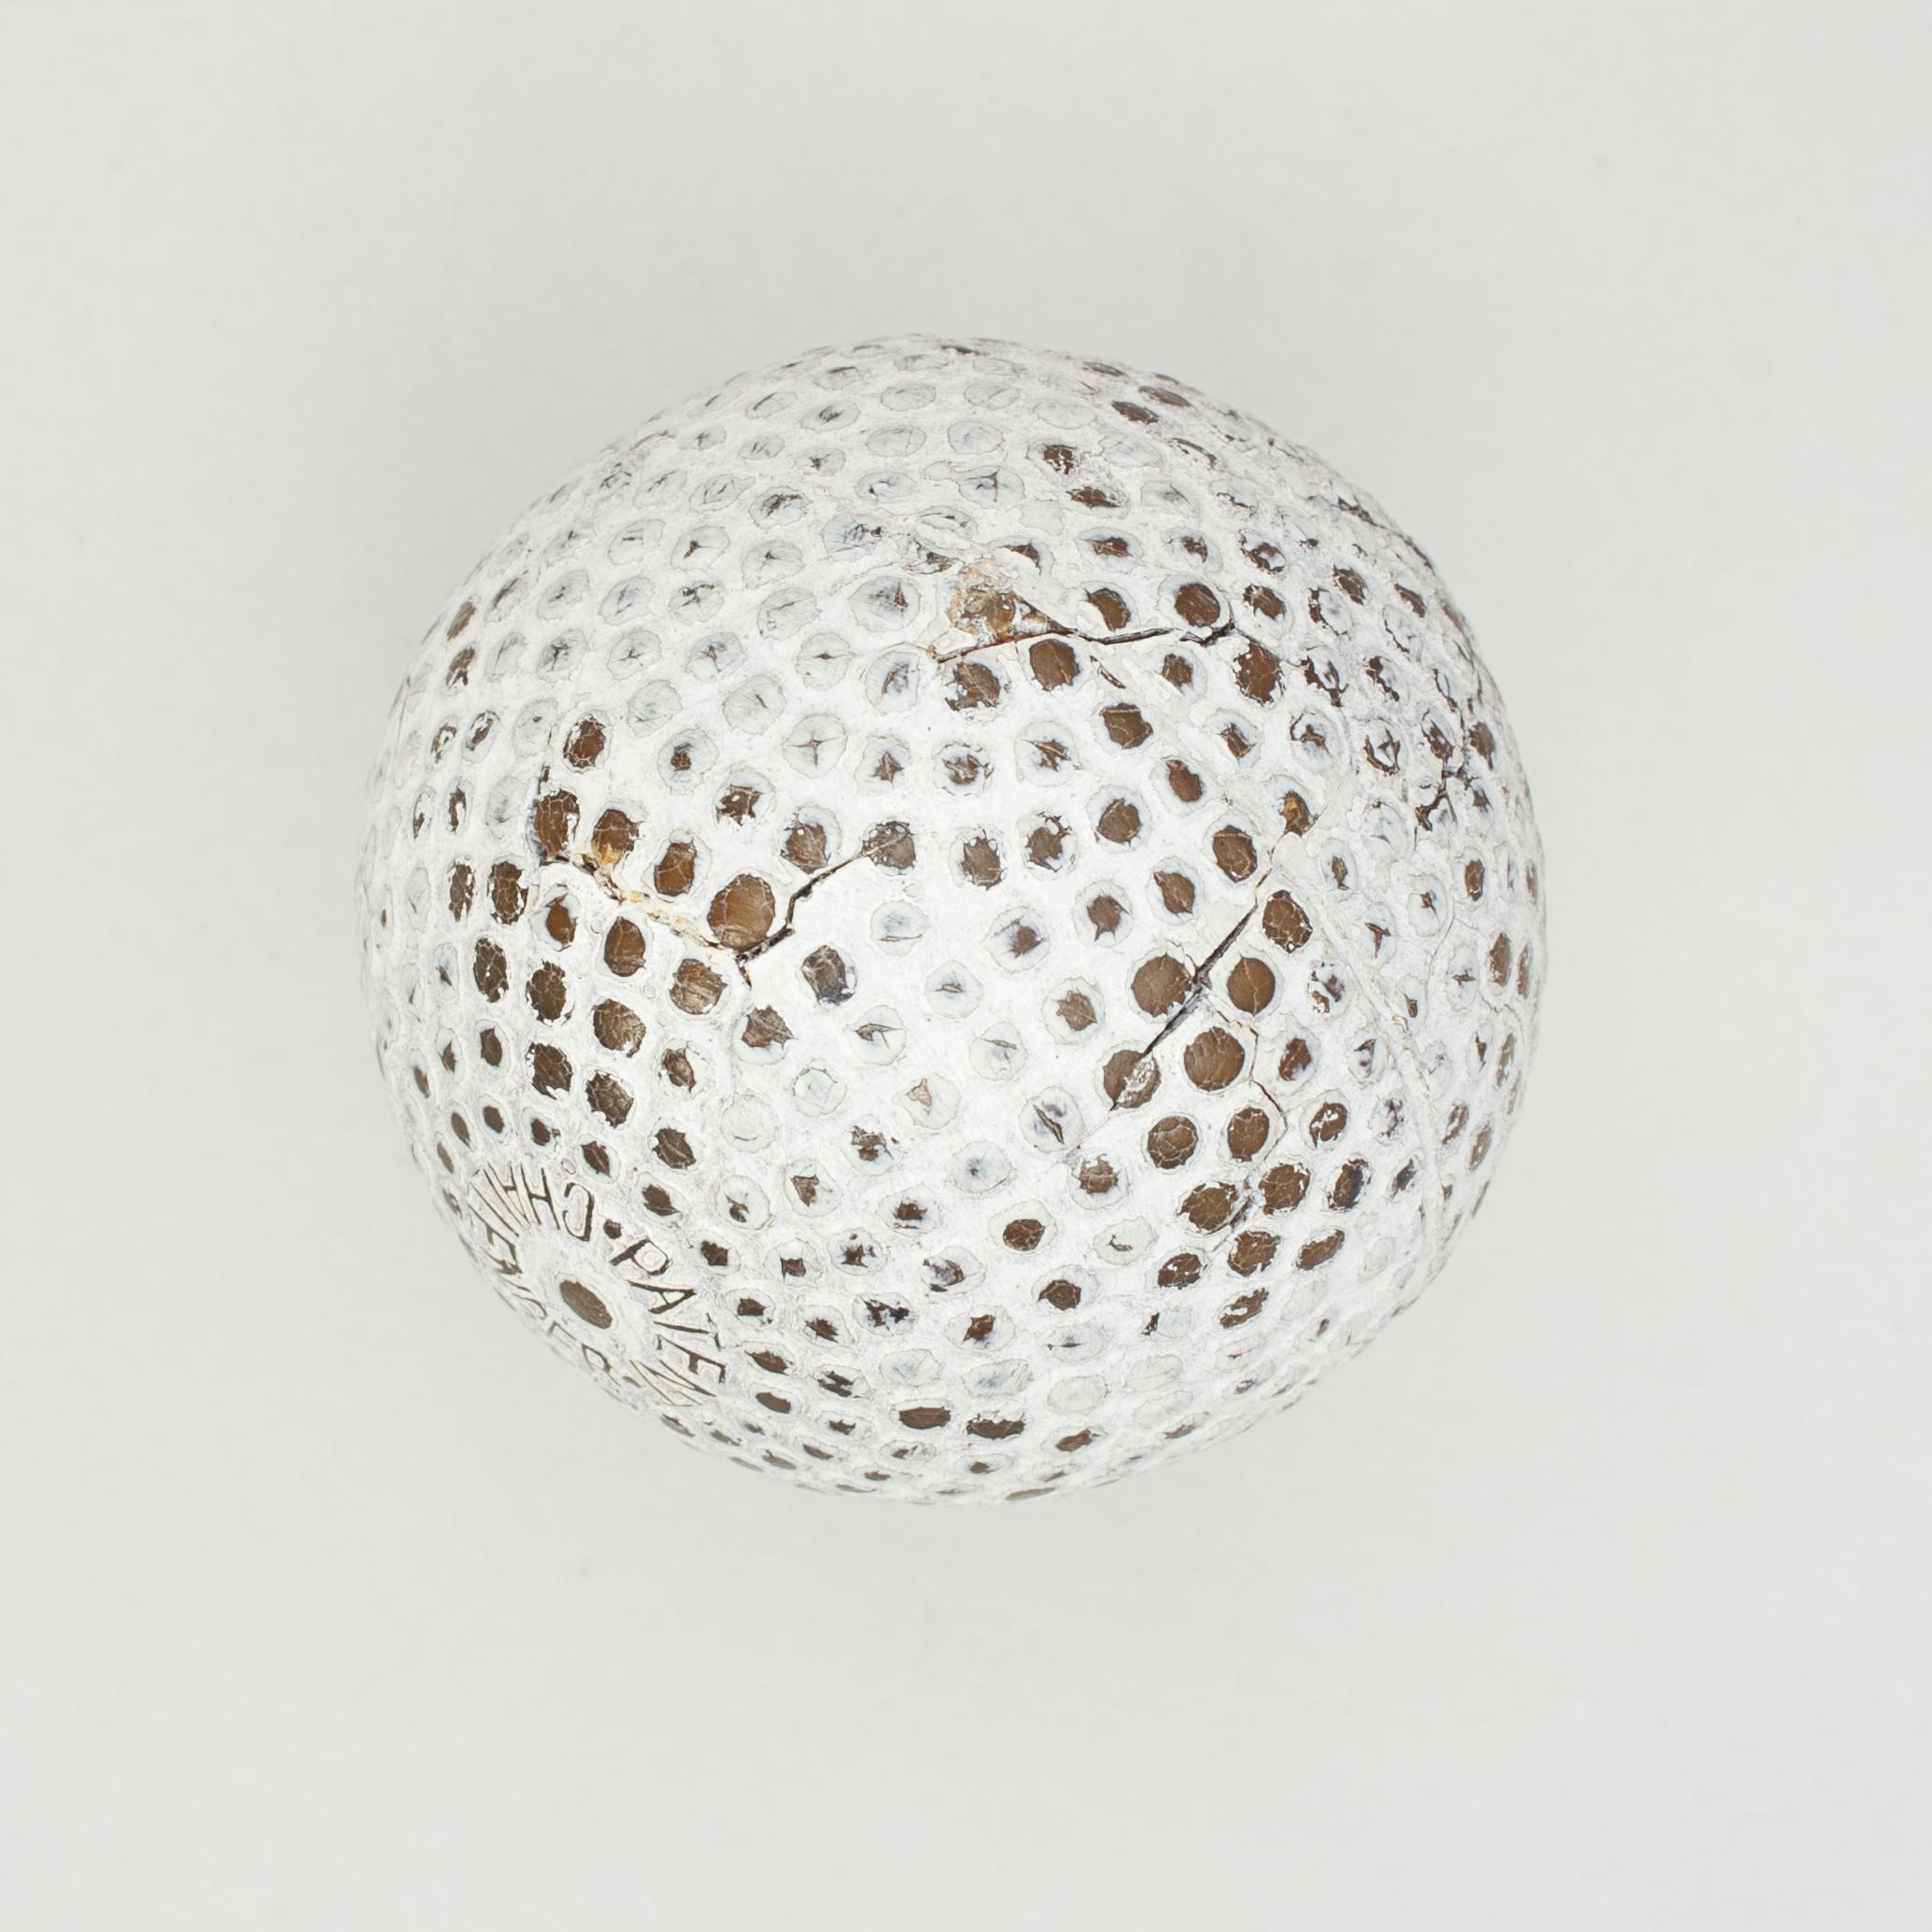 A good example of a 'Challenger' bramble patterned rubber core golf ball. The golf ball is in good condition and is manufactured by Cochrane, first as a gutty and then later as a rubber core ball. The ball is marked 'Patent. Challenger' on both